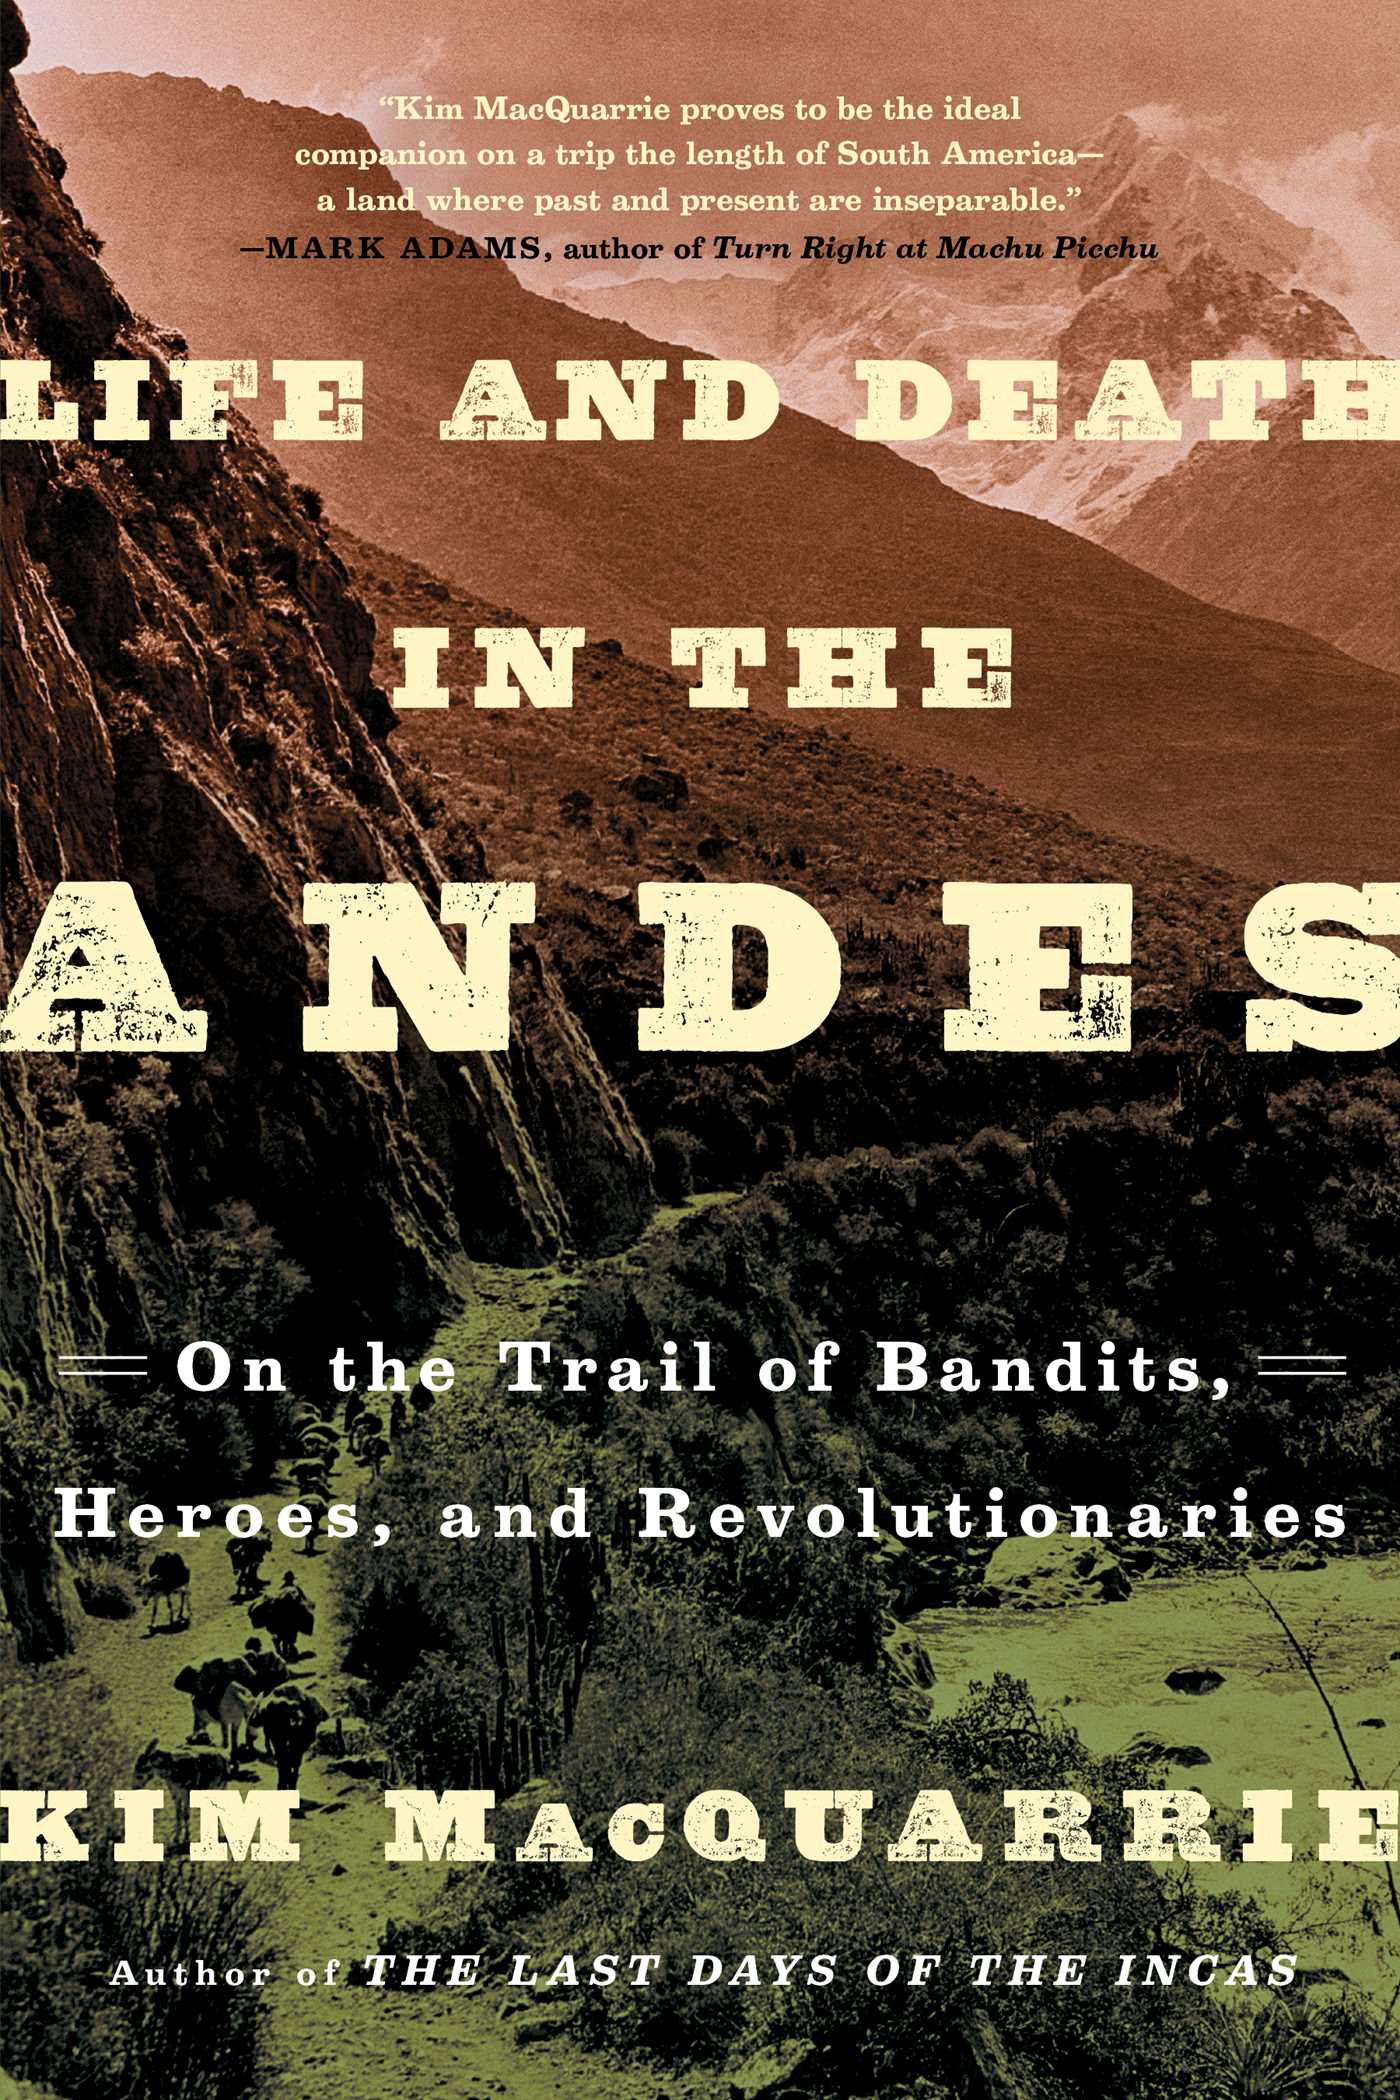 Life and Death in the Andes